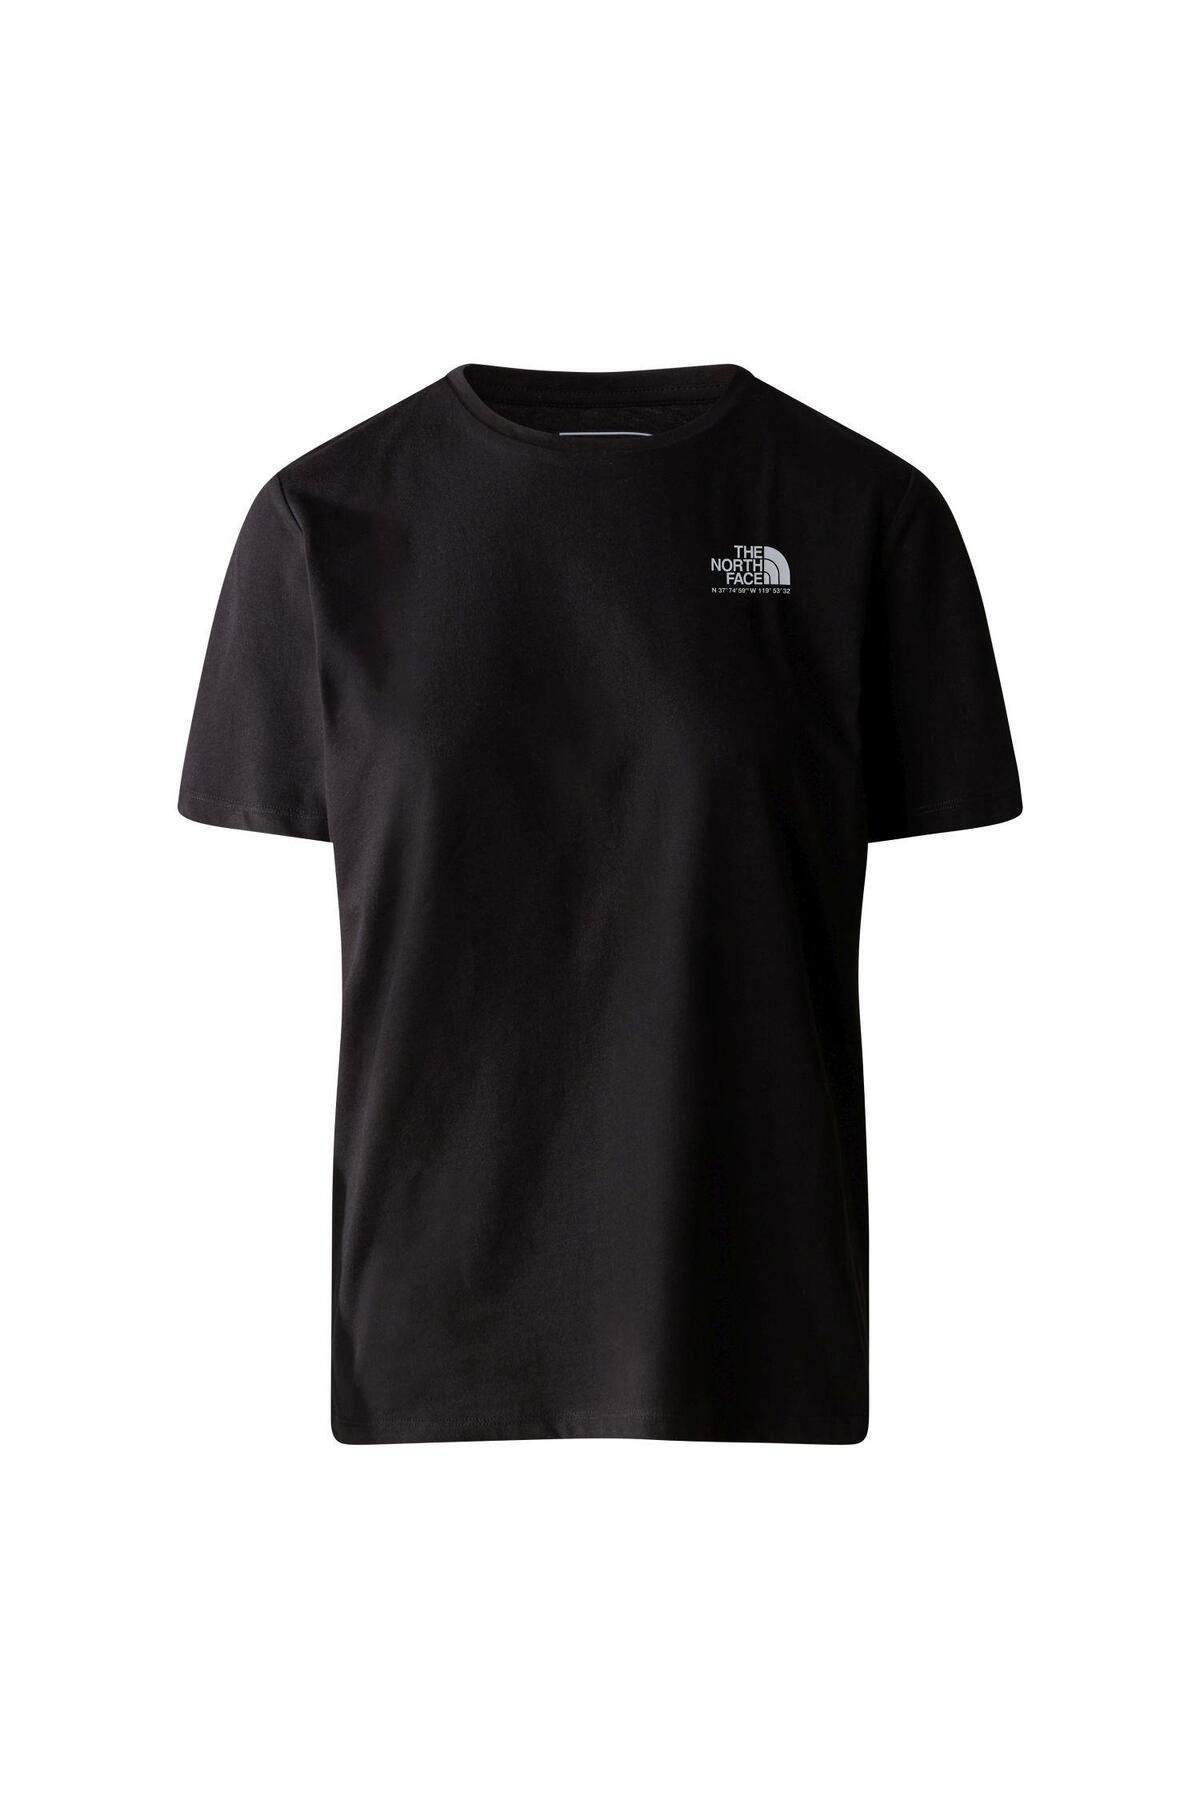 The North Face W Foundation Graphic Tee EU T-Shirt NF0A86XNKY41 Siyah-M